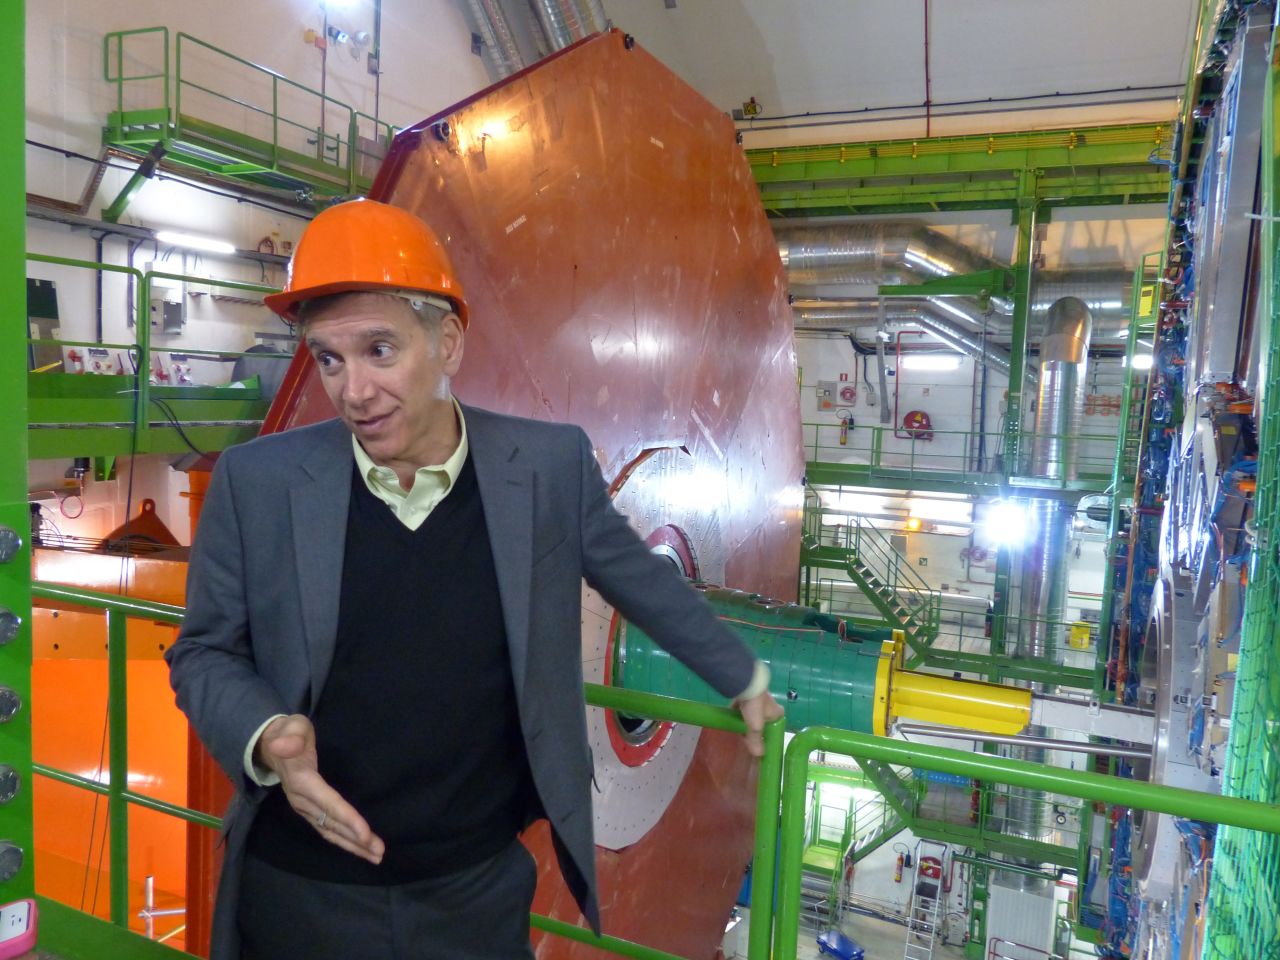 Joe Incandela, the spokesperson for CMS, says that about 4,000 scientists collaborate on the experiment. Behind him is a new red-colored layer to improve the detection of muons, which are fundamental particles